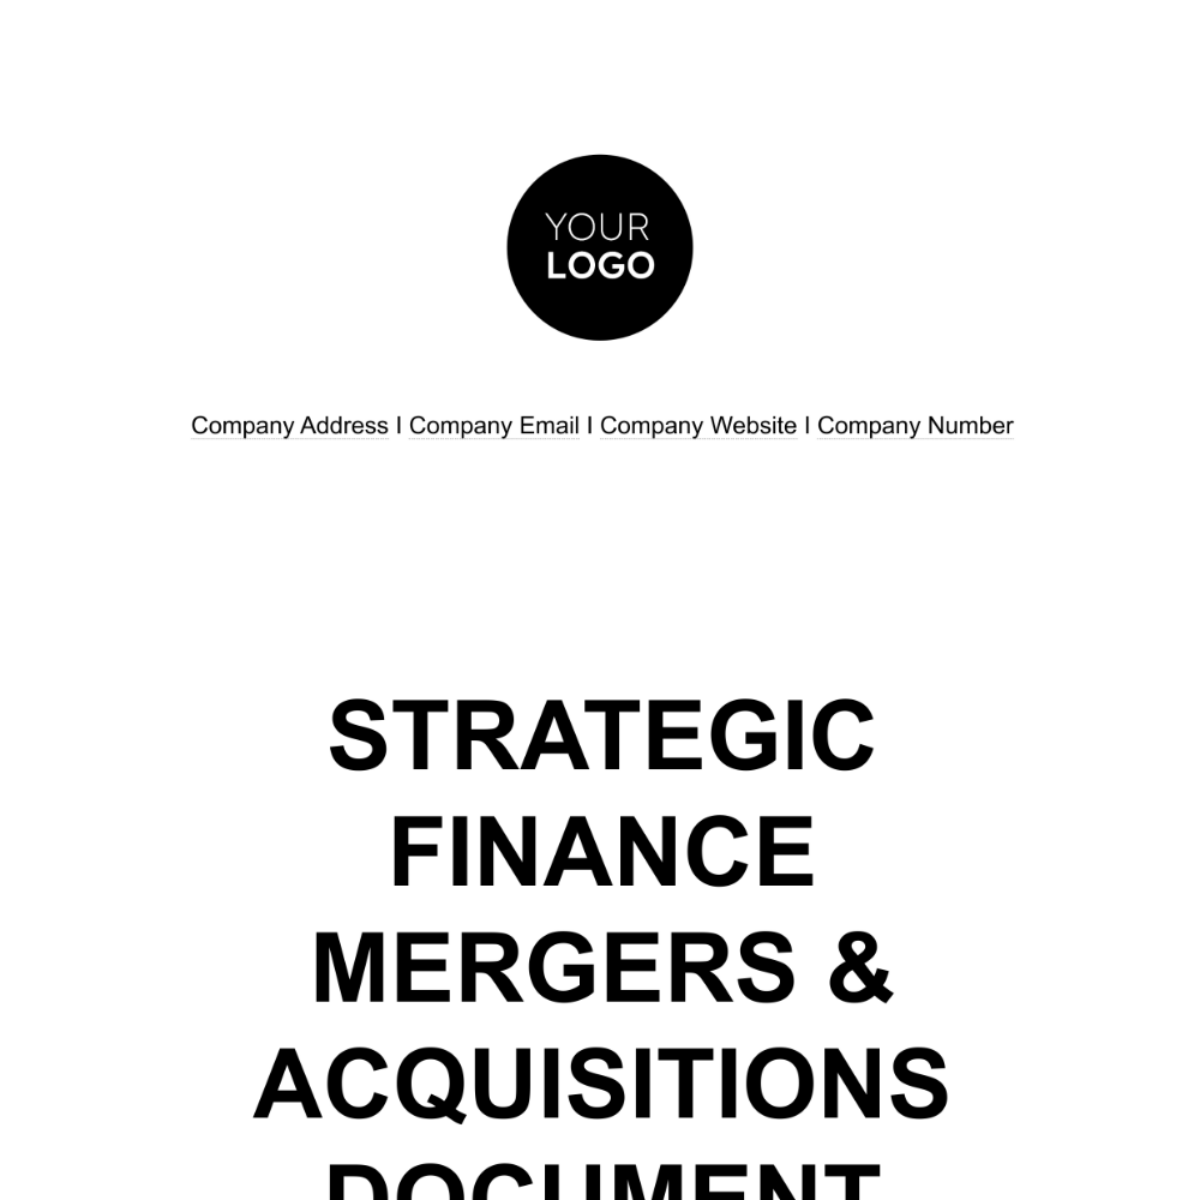 Free Strategic Finance Mergers & Acquisitions Document Template